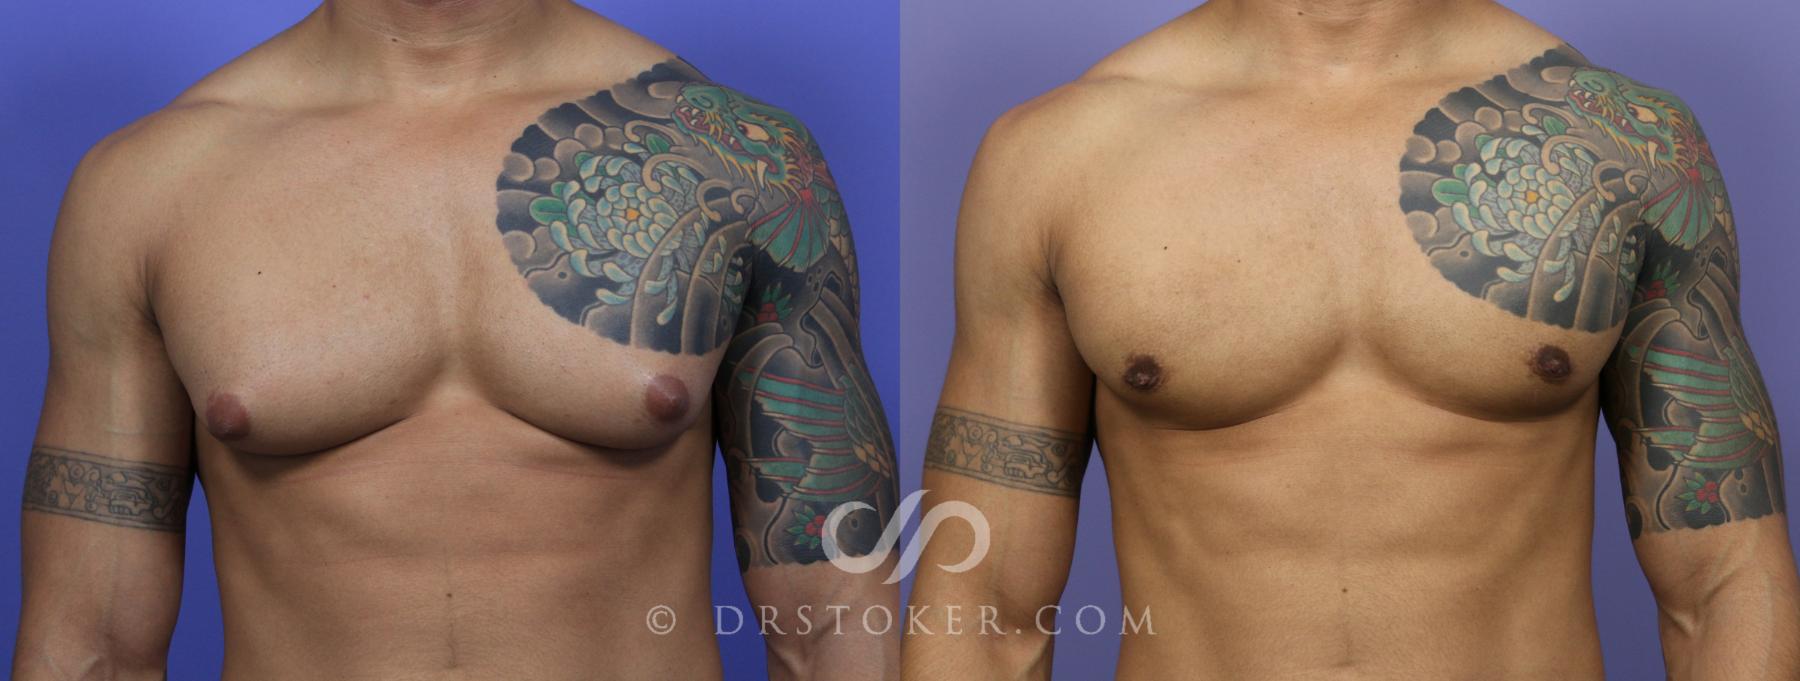 Out of Space Tattoo Removal - Pain and Blister Reduced Treatment | LinkedIn